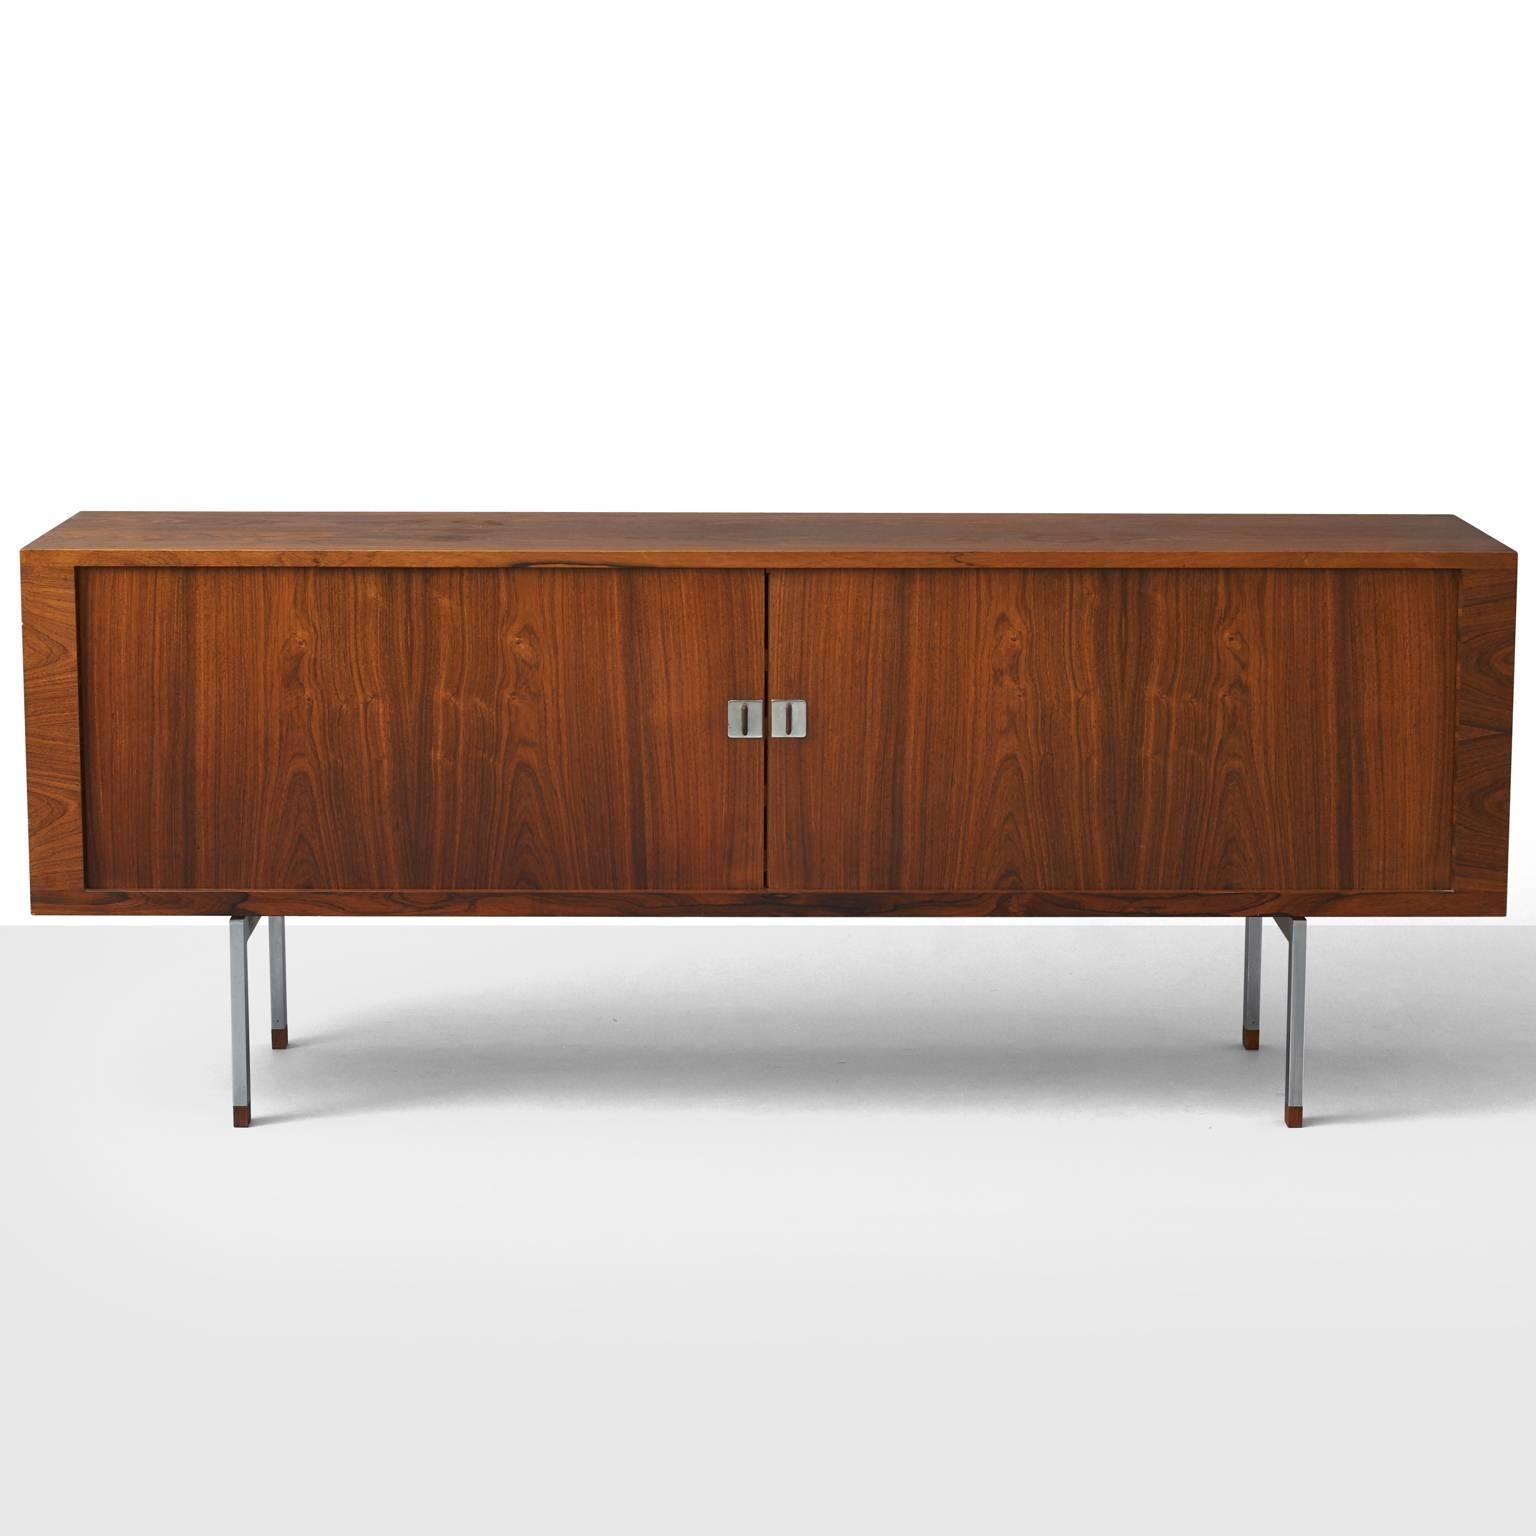 A low sideboard by H. J. Wegner. Features a Brazilian rosewood front with two tambour doors enclosing oak shelves and sliding trays. Chromed metal base with rosewood leg ends. Produced by Ry Møbler. Includes certificate from the Danish forest and